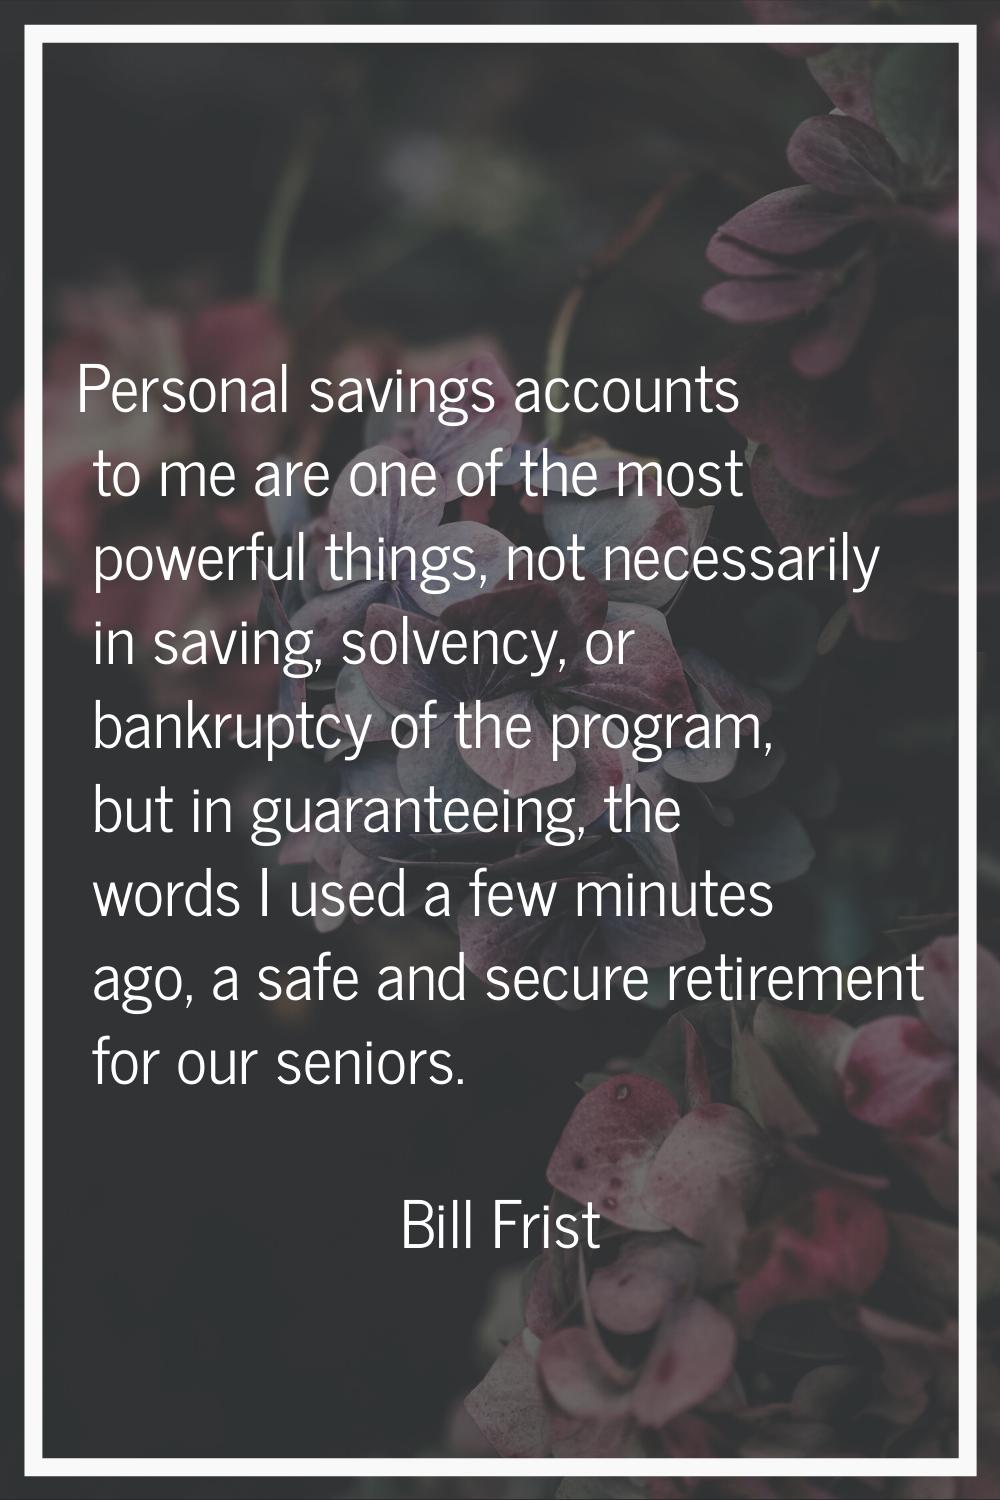 Personal savings accounts to me are one of the most powerful things, not necessarily in saving, sol